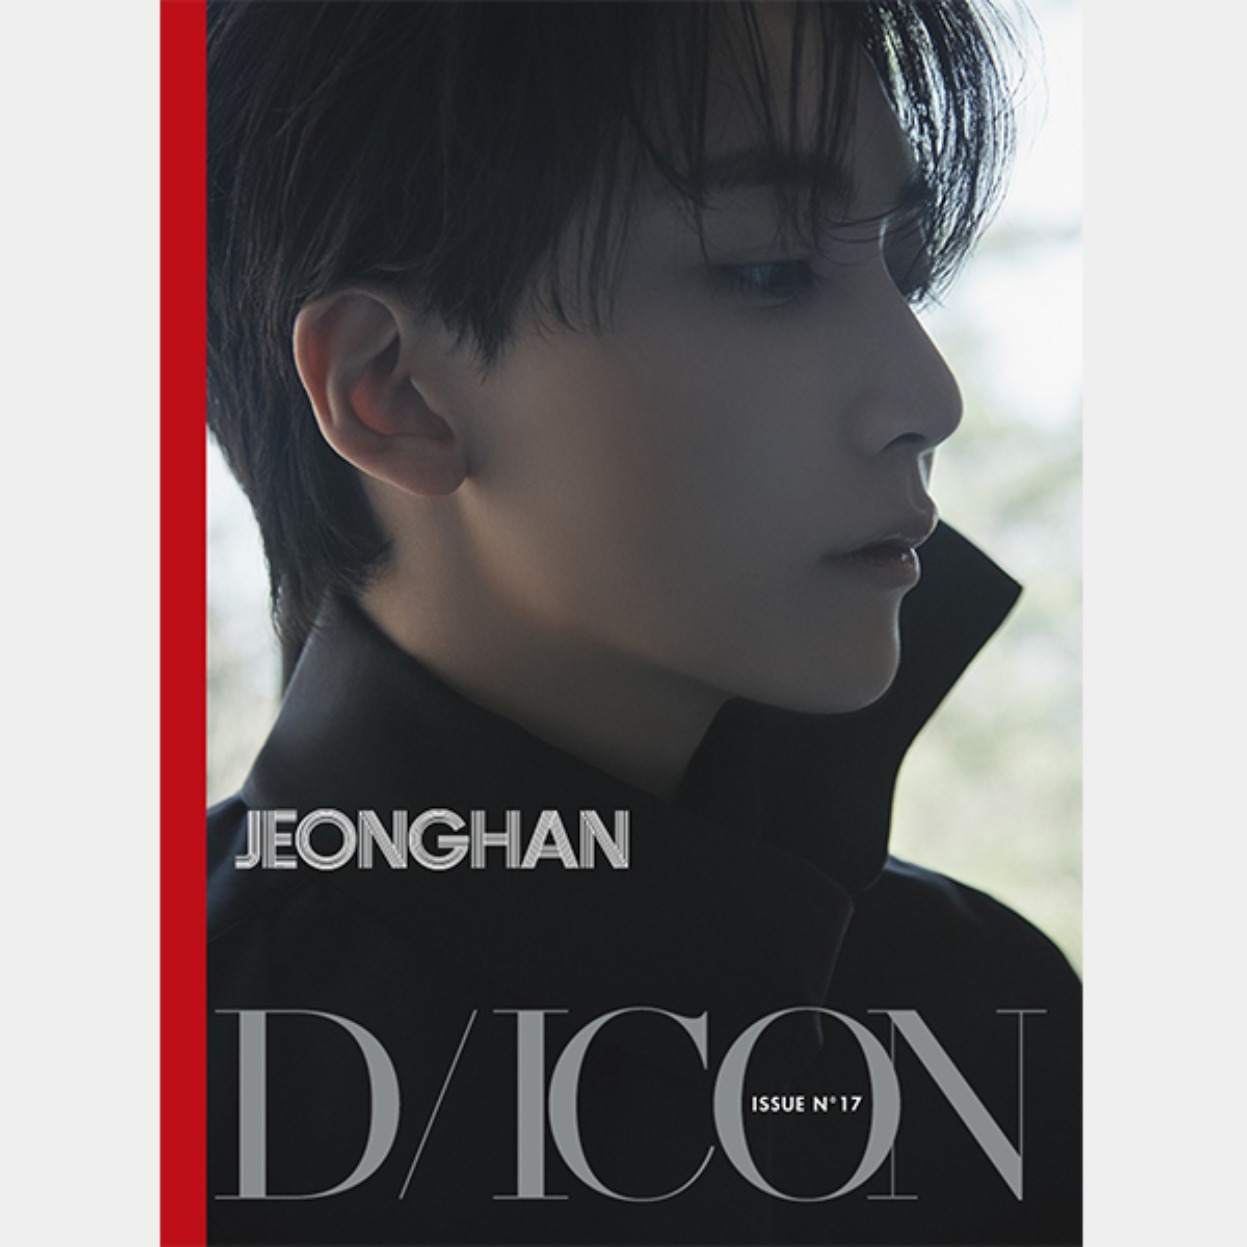 DICON ISSUE N°17 : JEONGHAN A-type